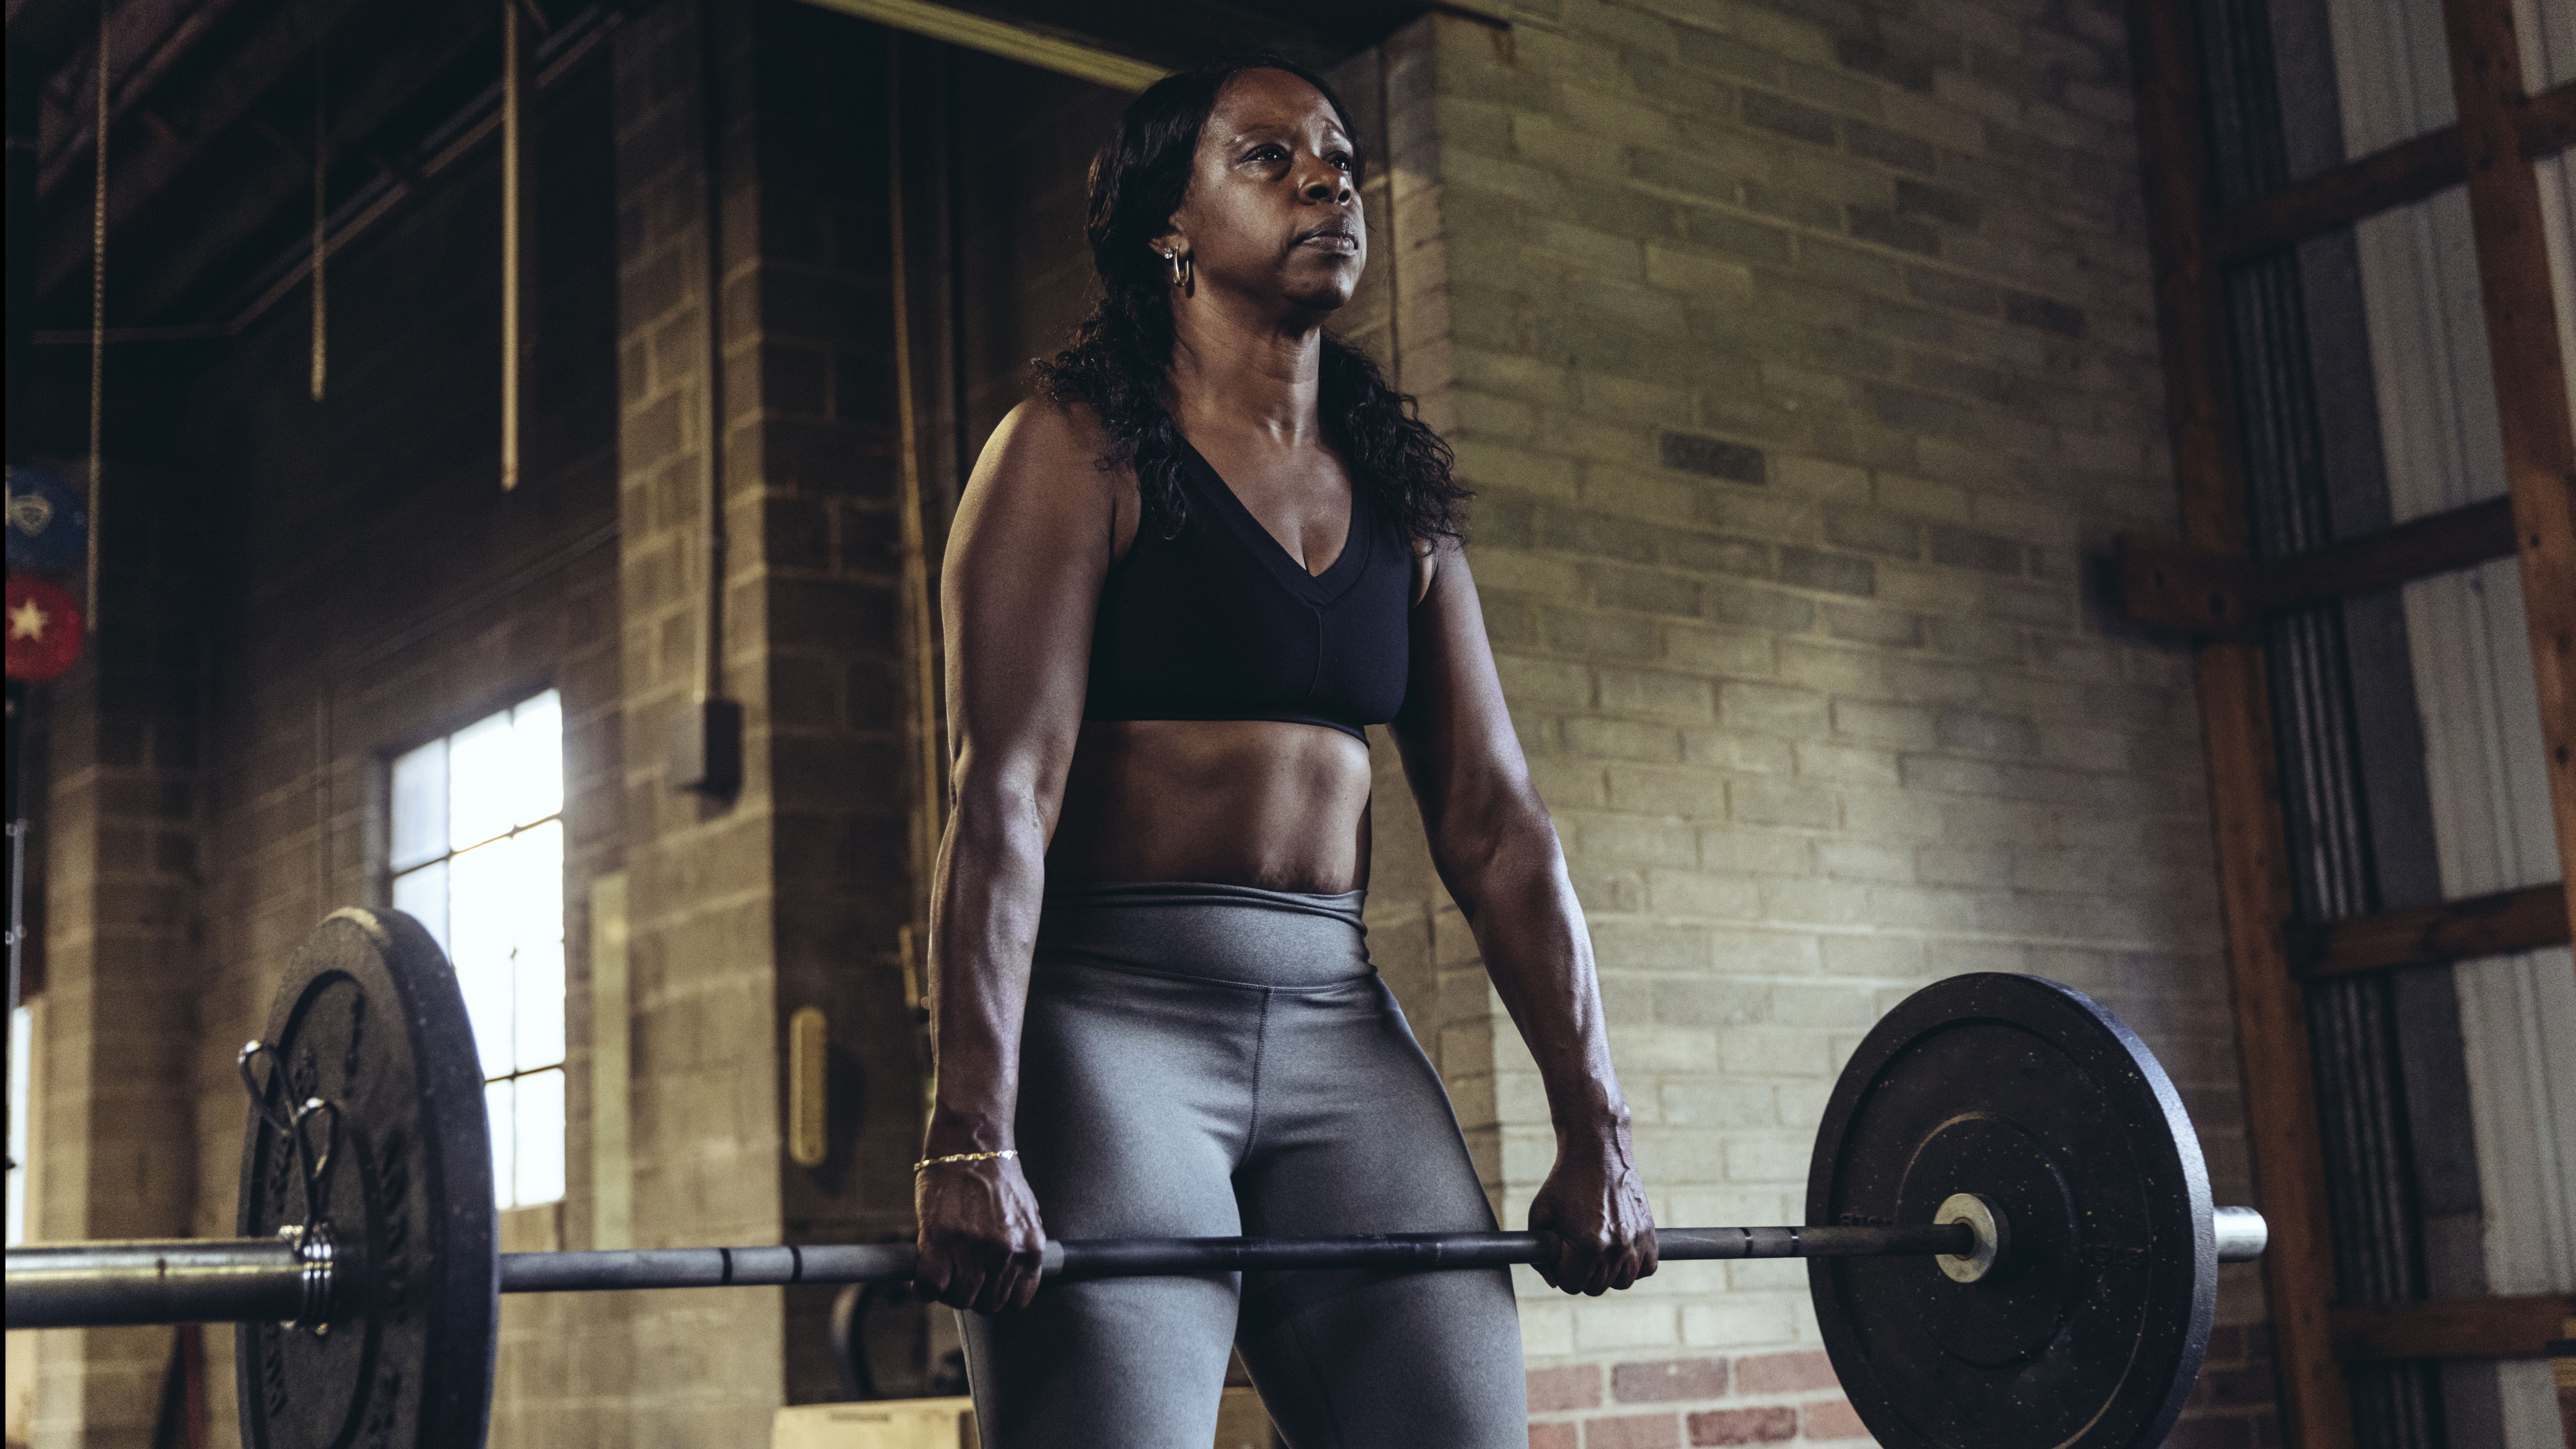 A woman holds a barbell